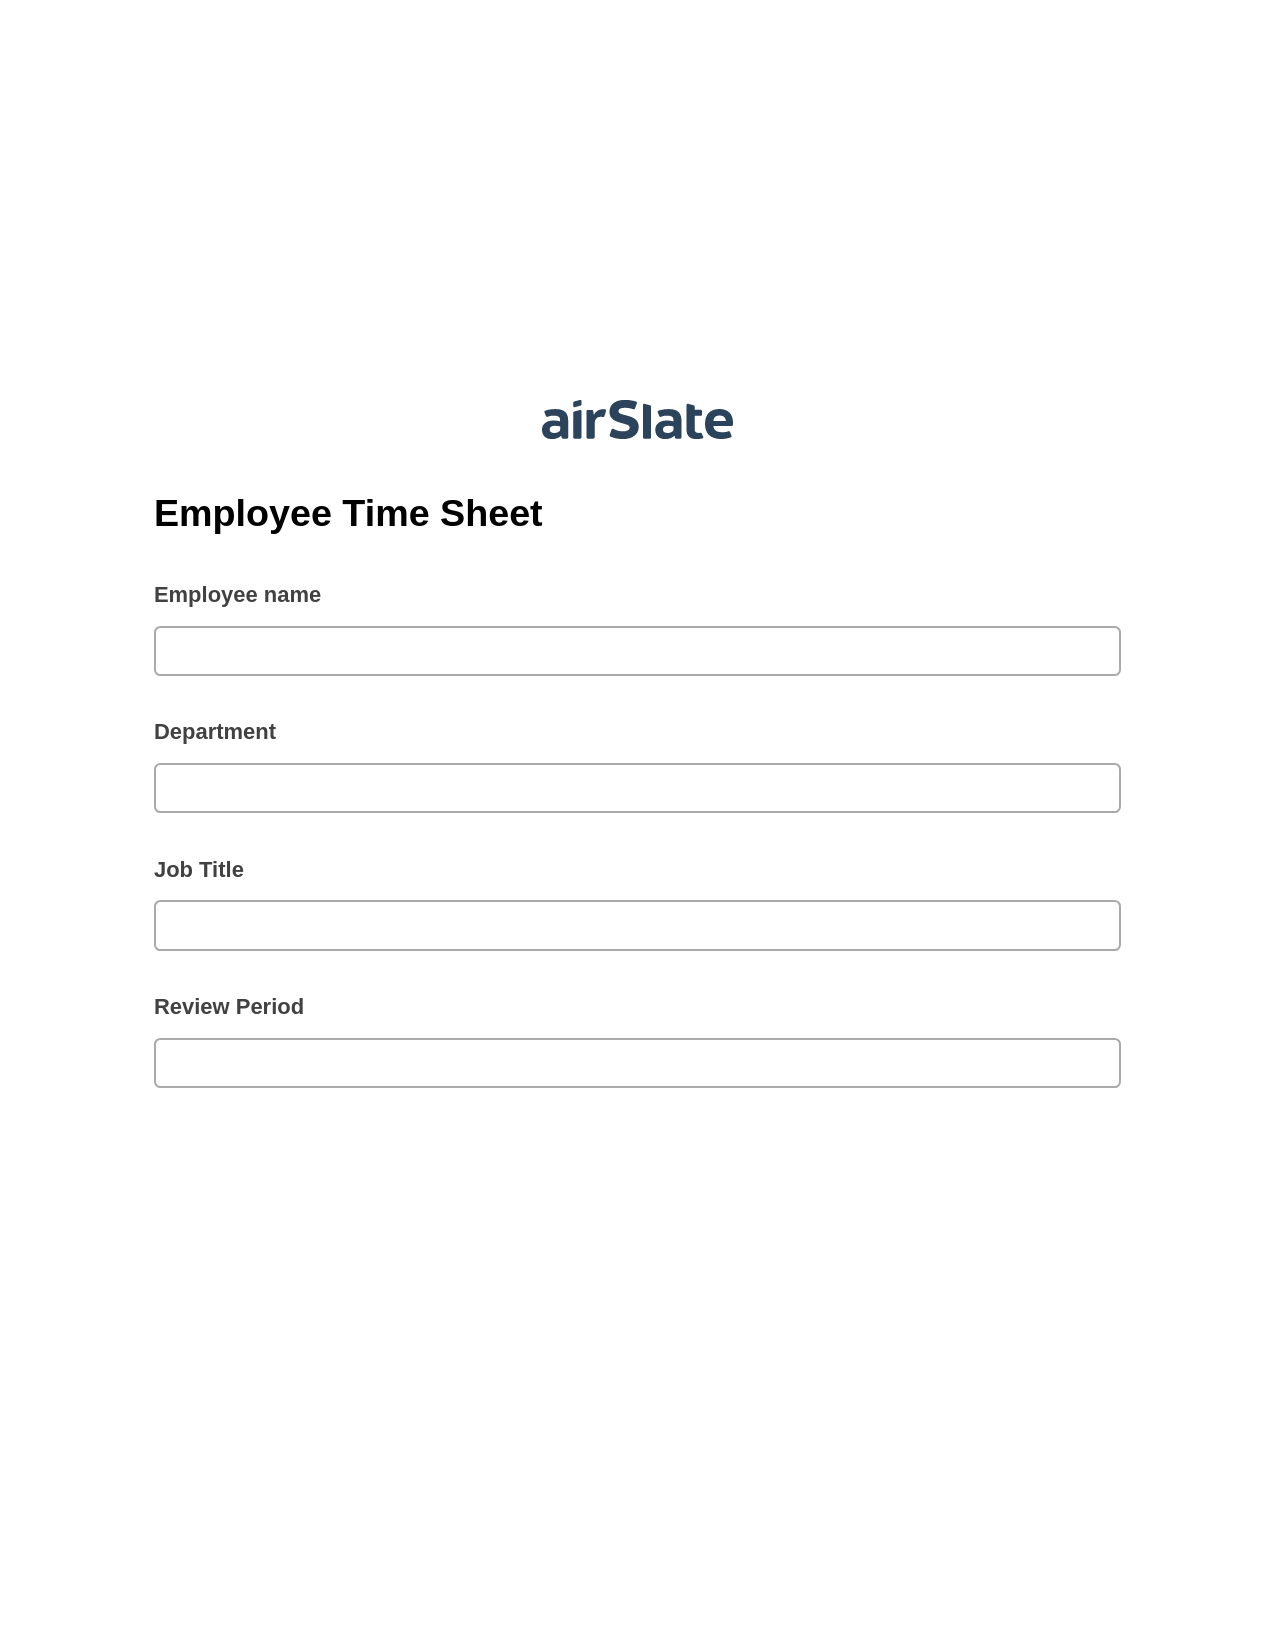 Multirole Employee Time Sheet Pre-fill from another Slate Bot, Create slate addon, Export to Excel 365 Bot